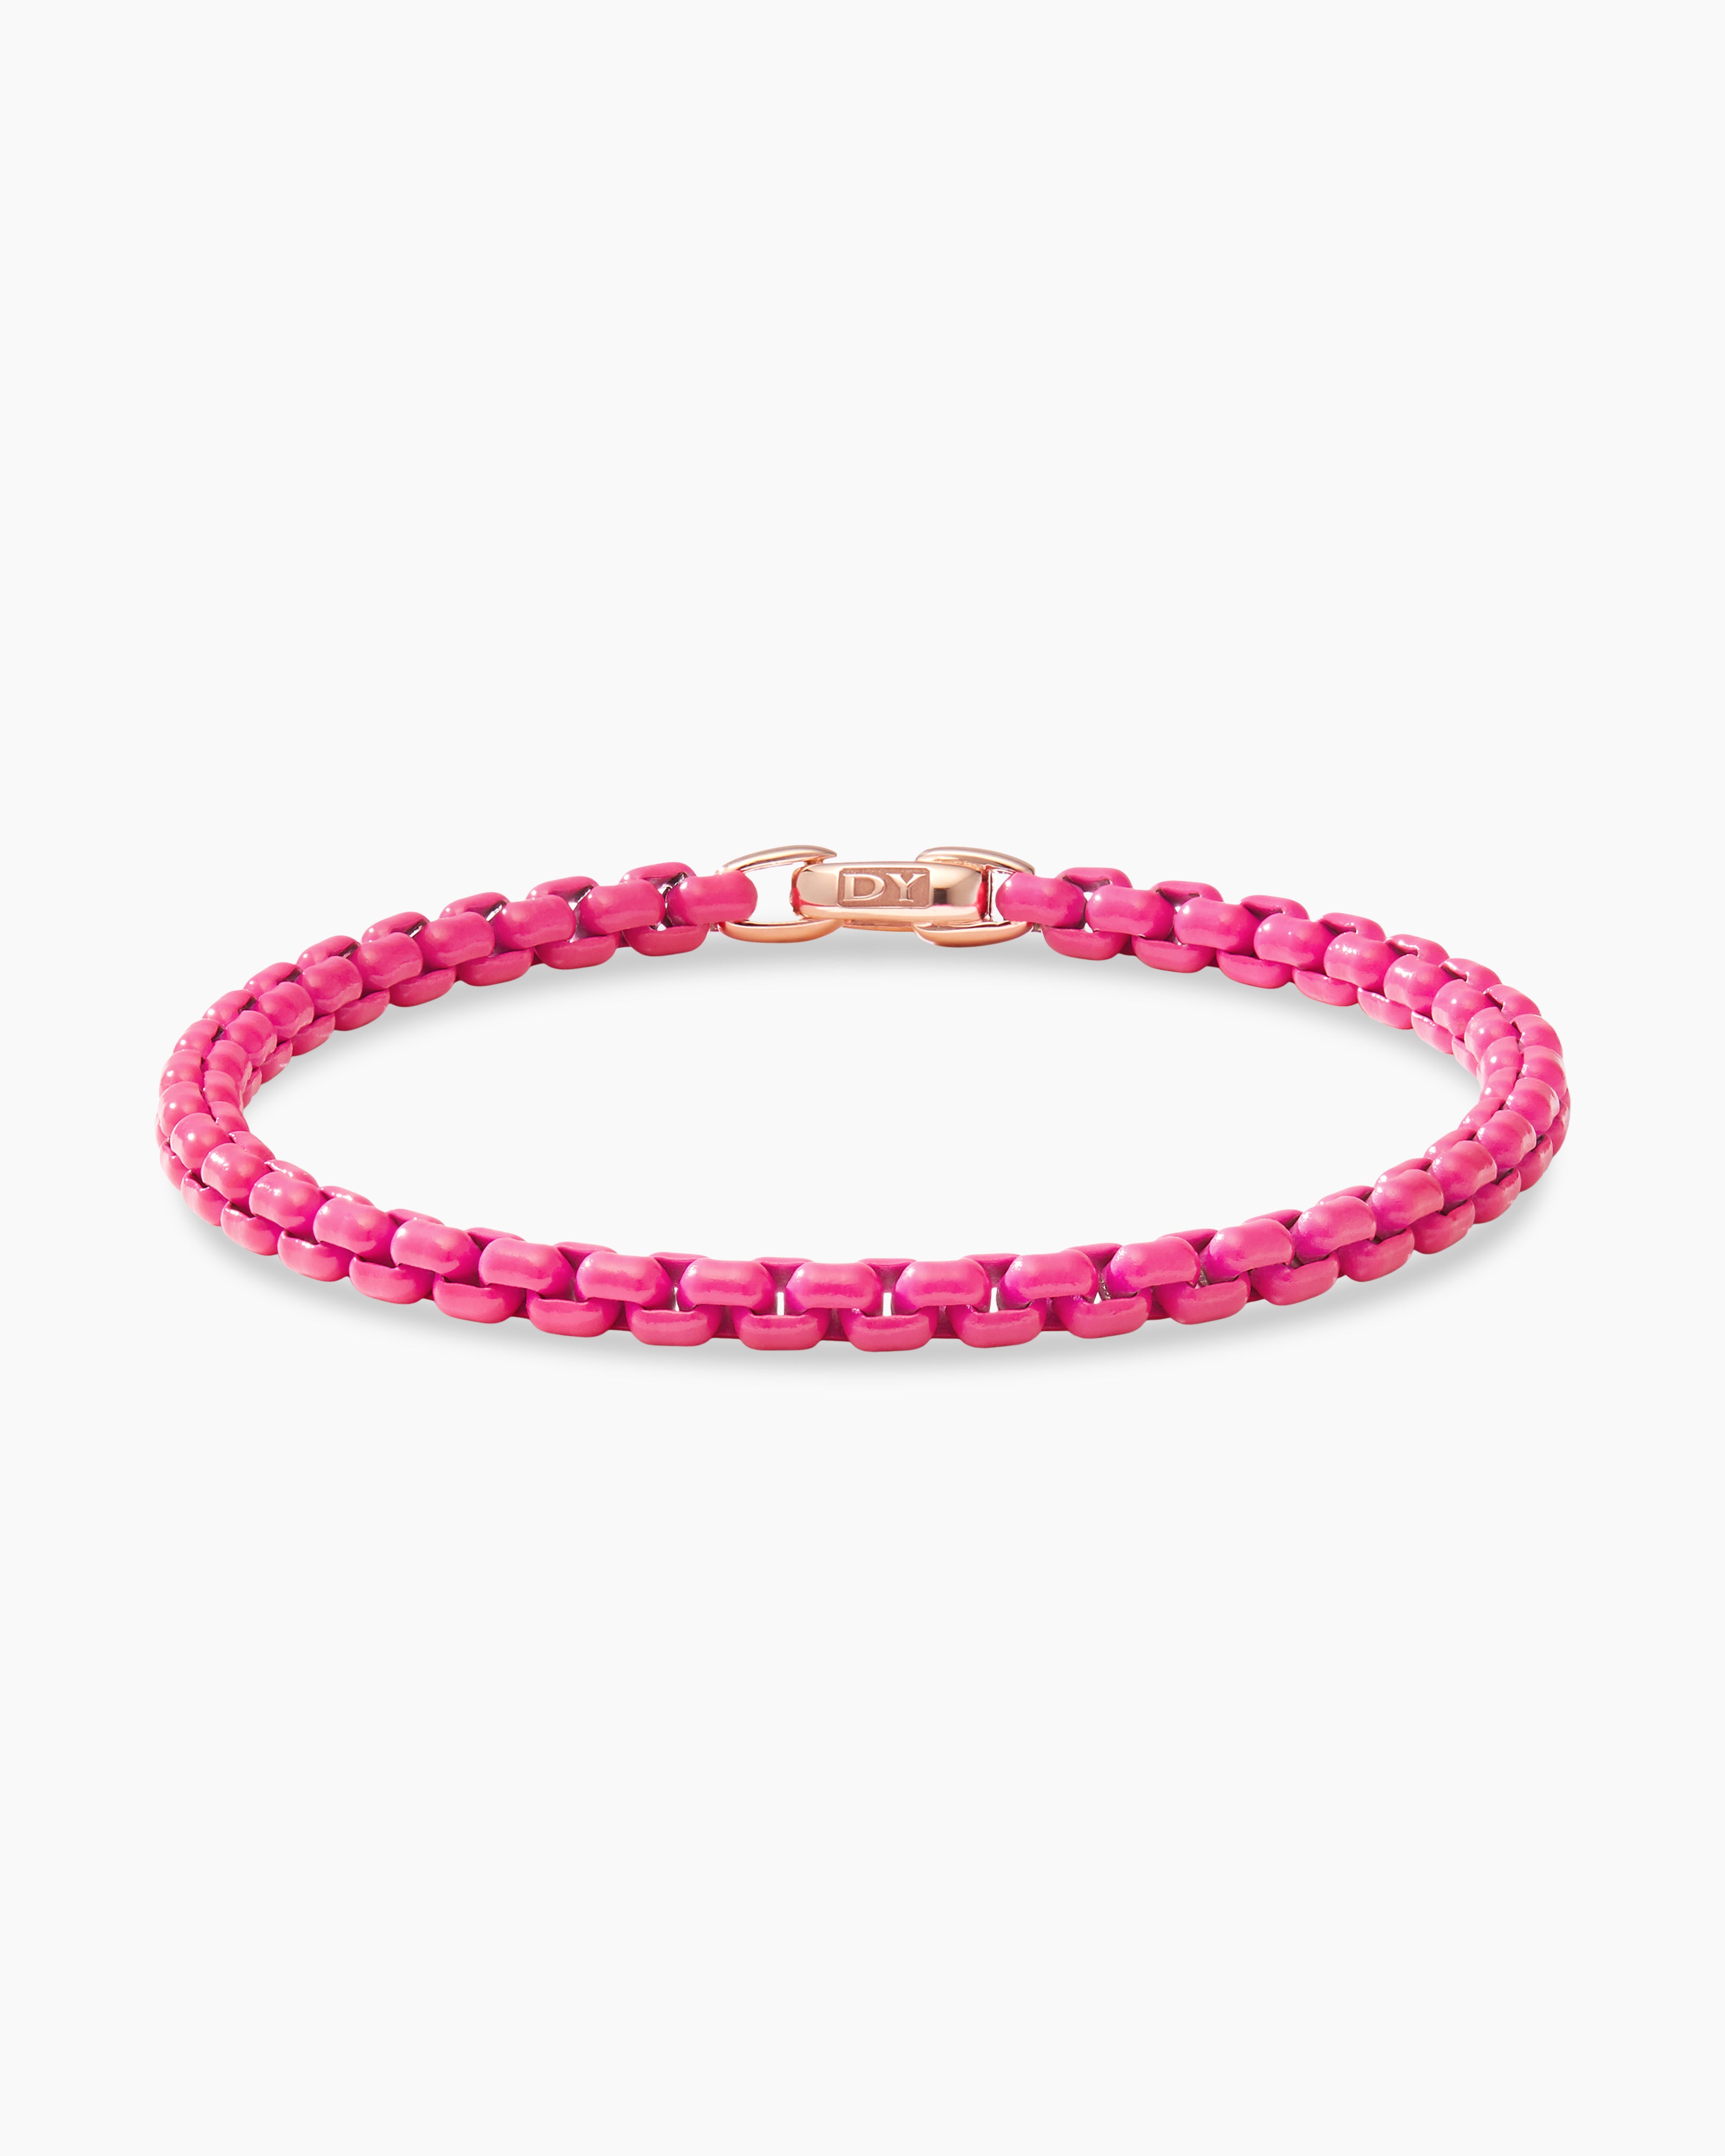 DY Bel Aire Color Box Chain Bracelet in Hot Pink Acrylic with 14K